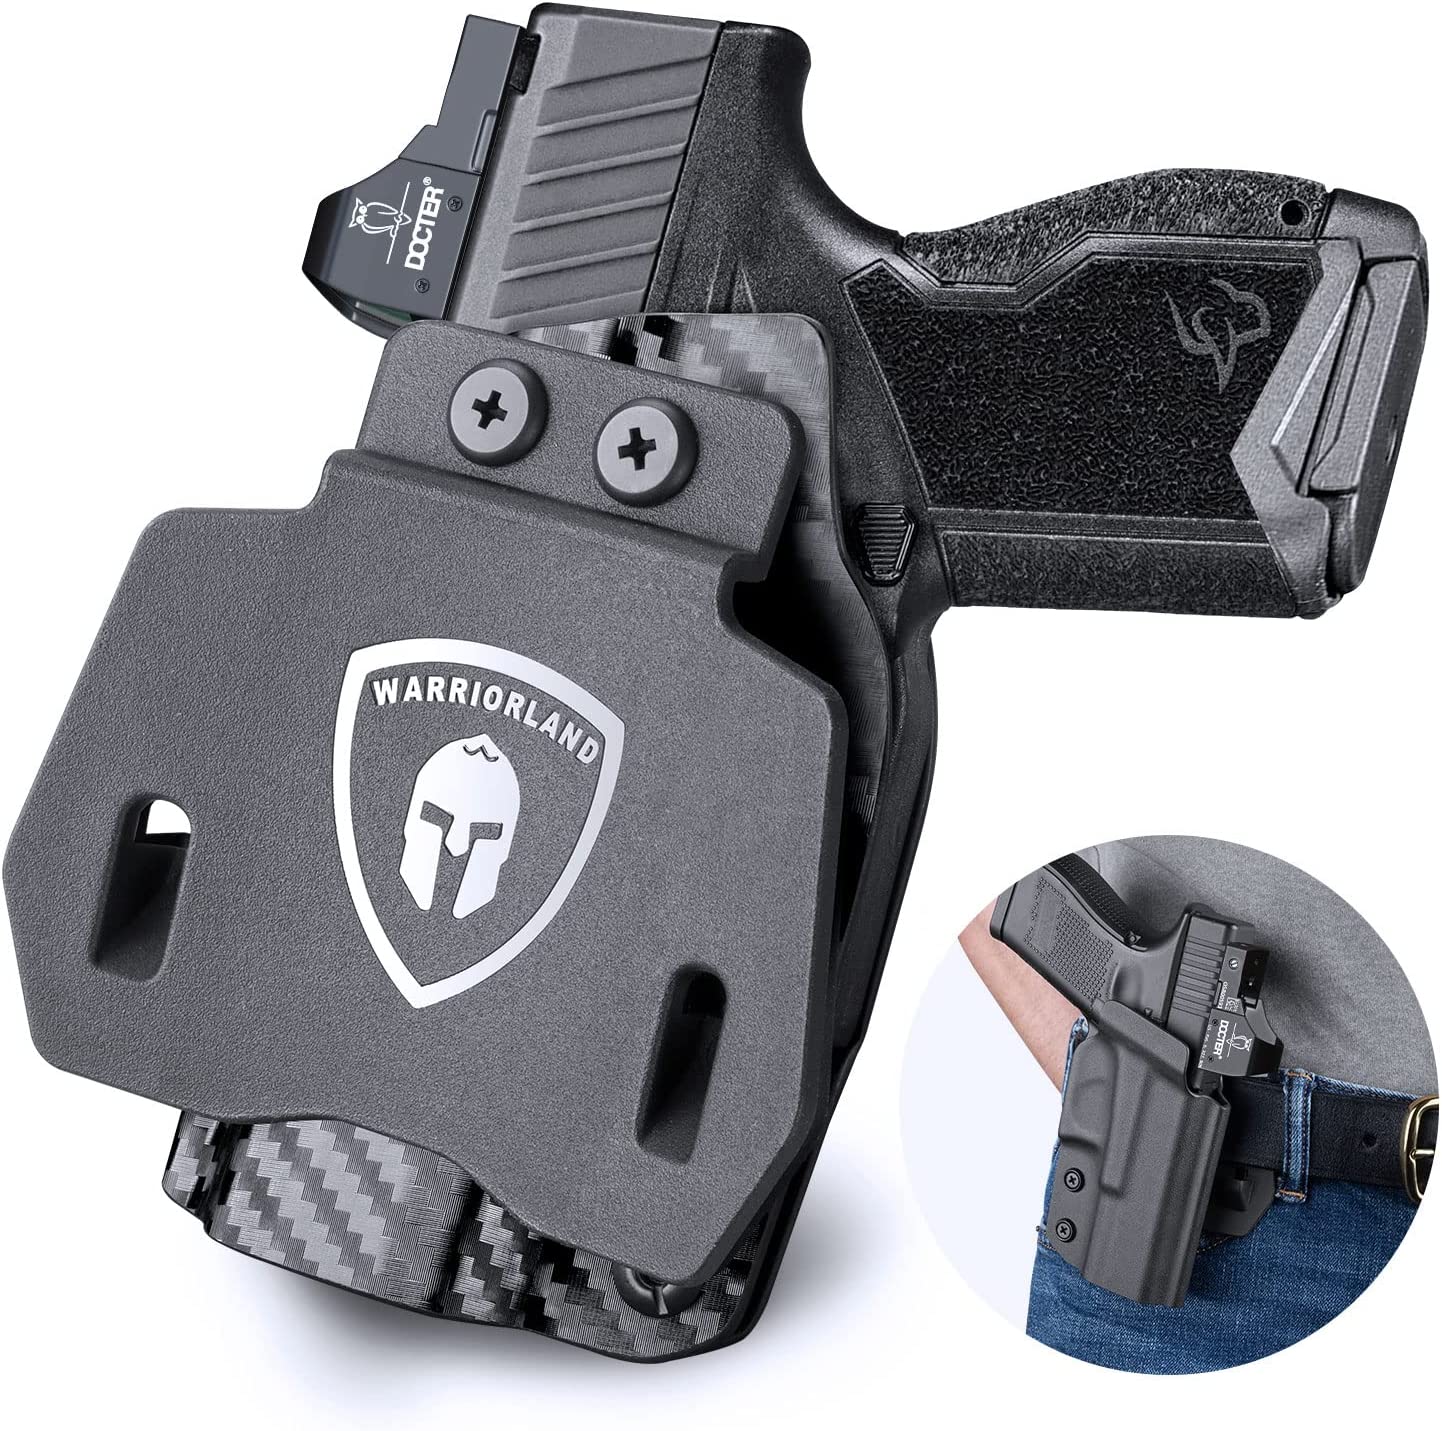 Taurus GX4 OWB Kydex Paddle Holster Appendix Open Carry Fully Trigger Guard with Red Dot Optics Cut | WARRIORLAND